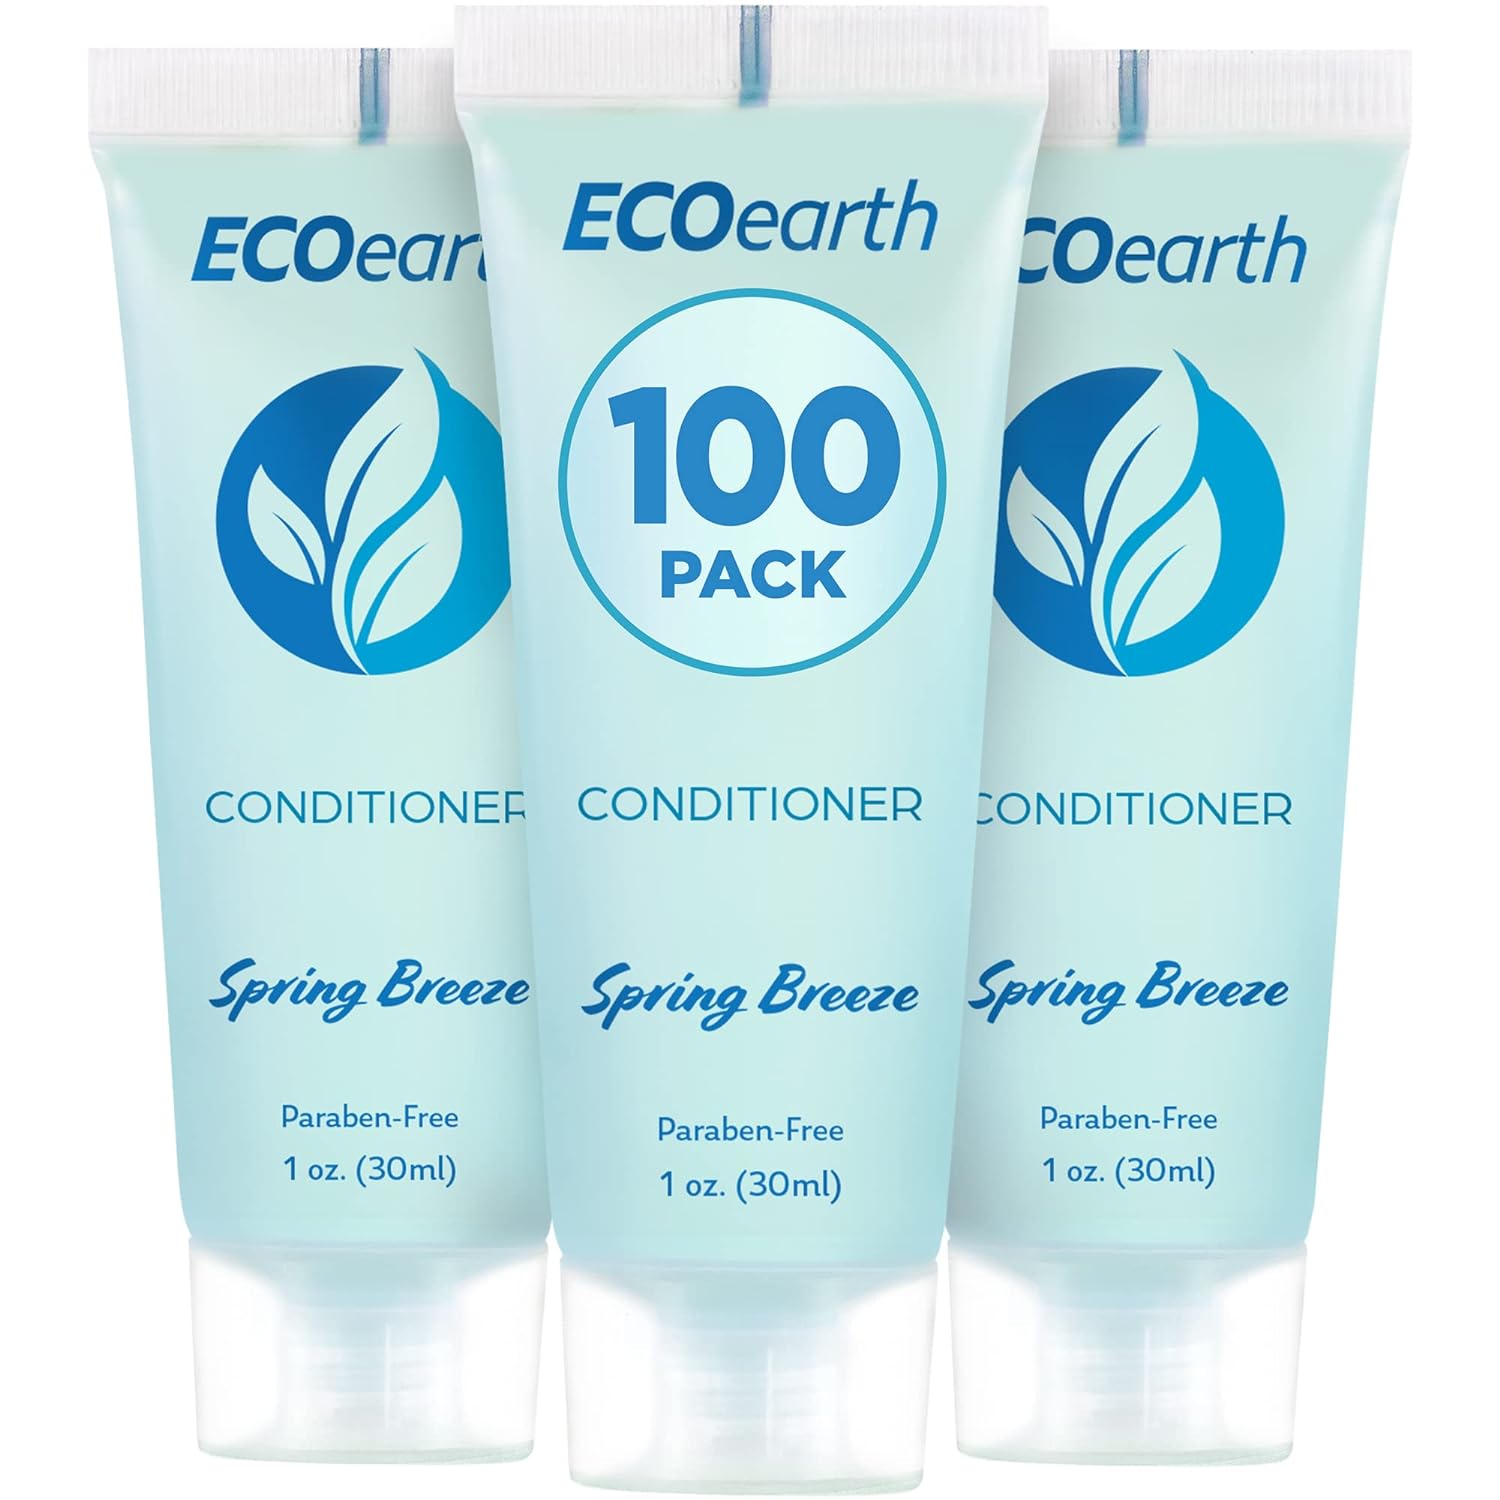 EcoEarth Travel Size Conditioner (1  , 100 PK, Spring Breeze), Delight Your Guests with Revitalizing and Refreshing Hotel Conditioner, Quality Small Size Travel Amenities Hotel Toiletries in Bulk